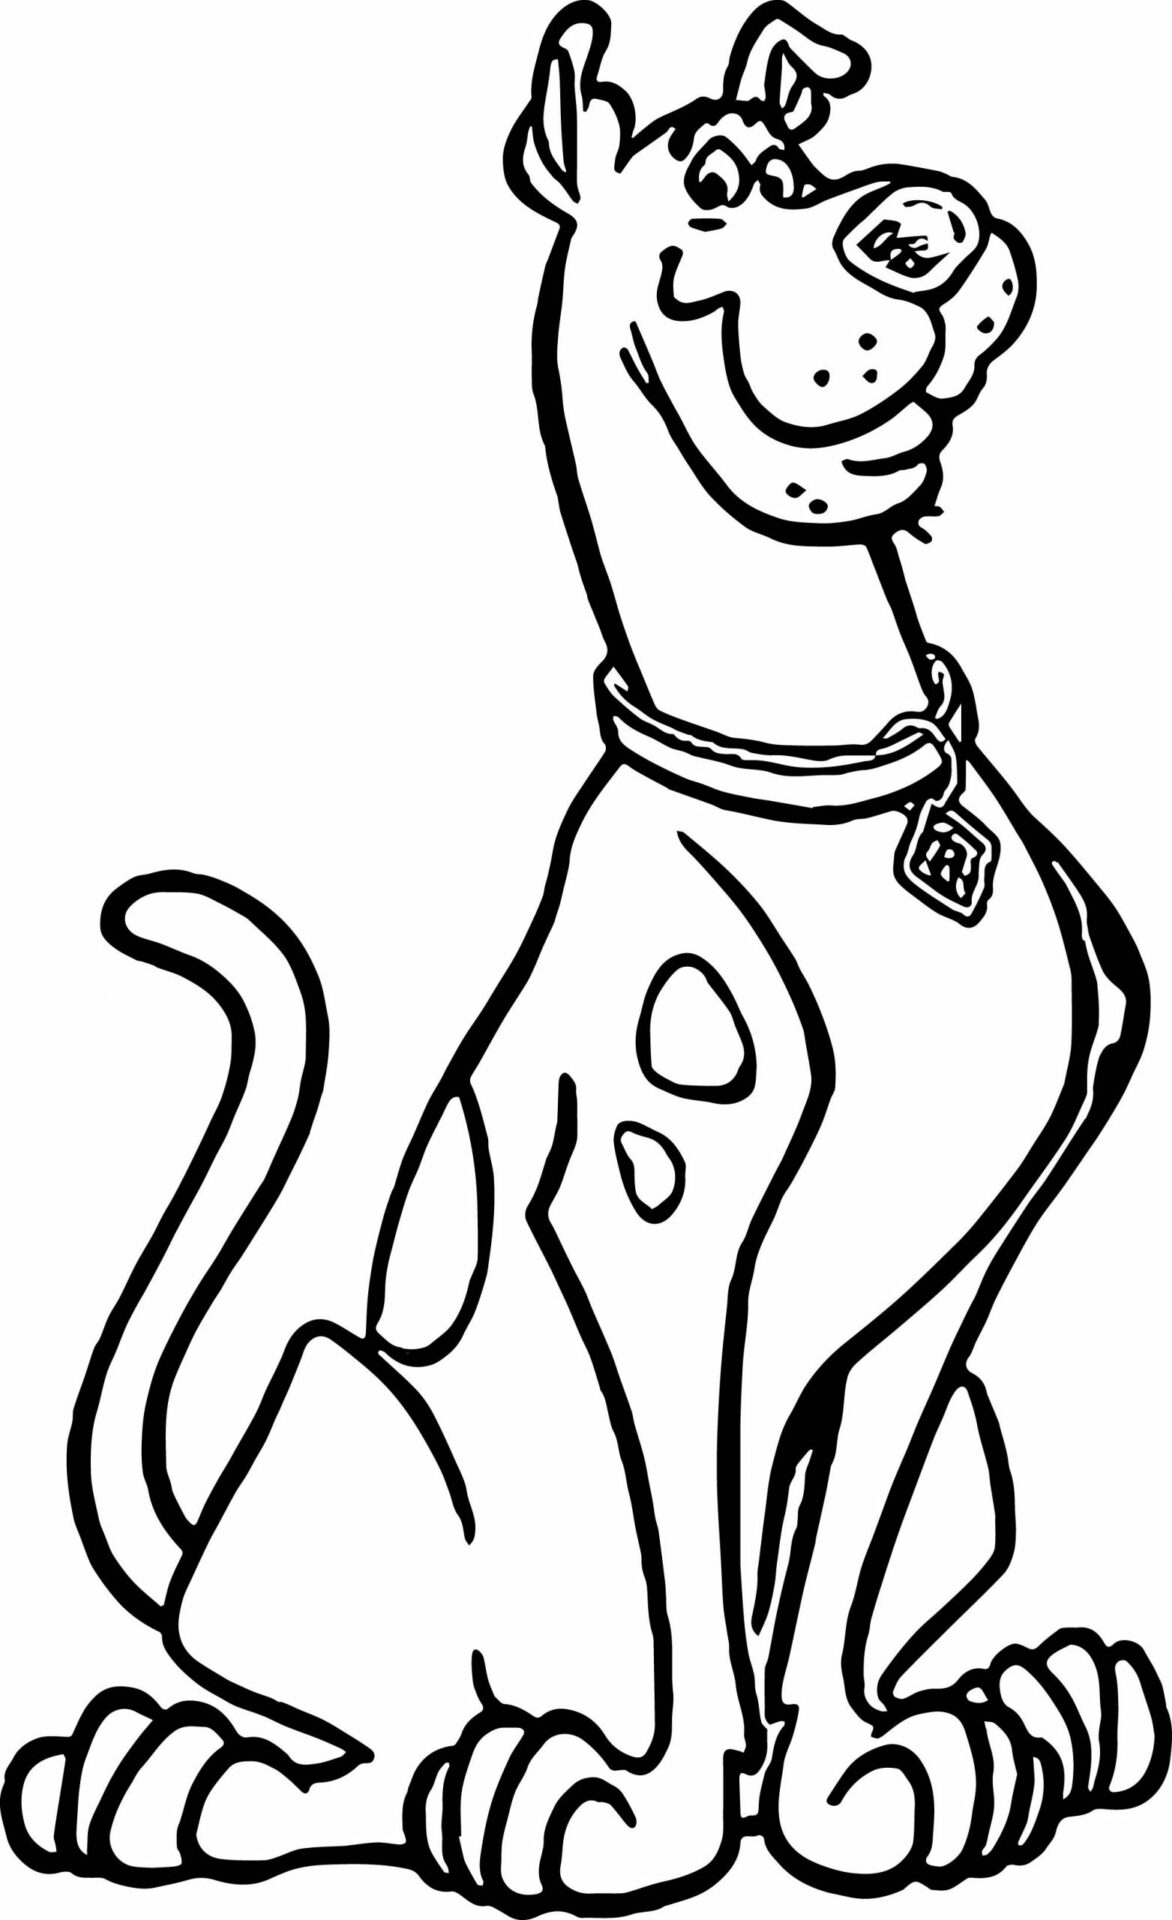 Scooby Doo Coloring Pages Free Printable Coloring Pages for Kids